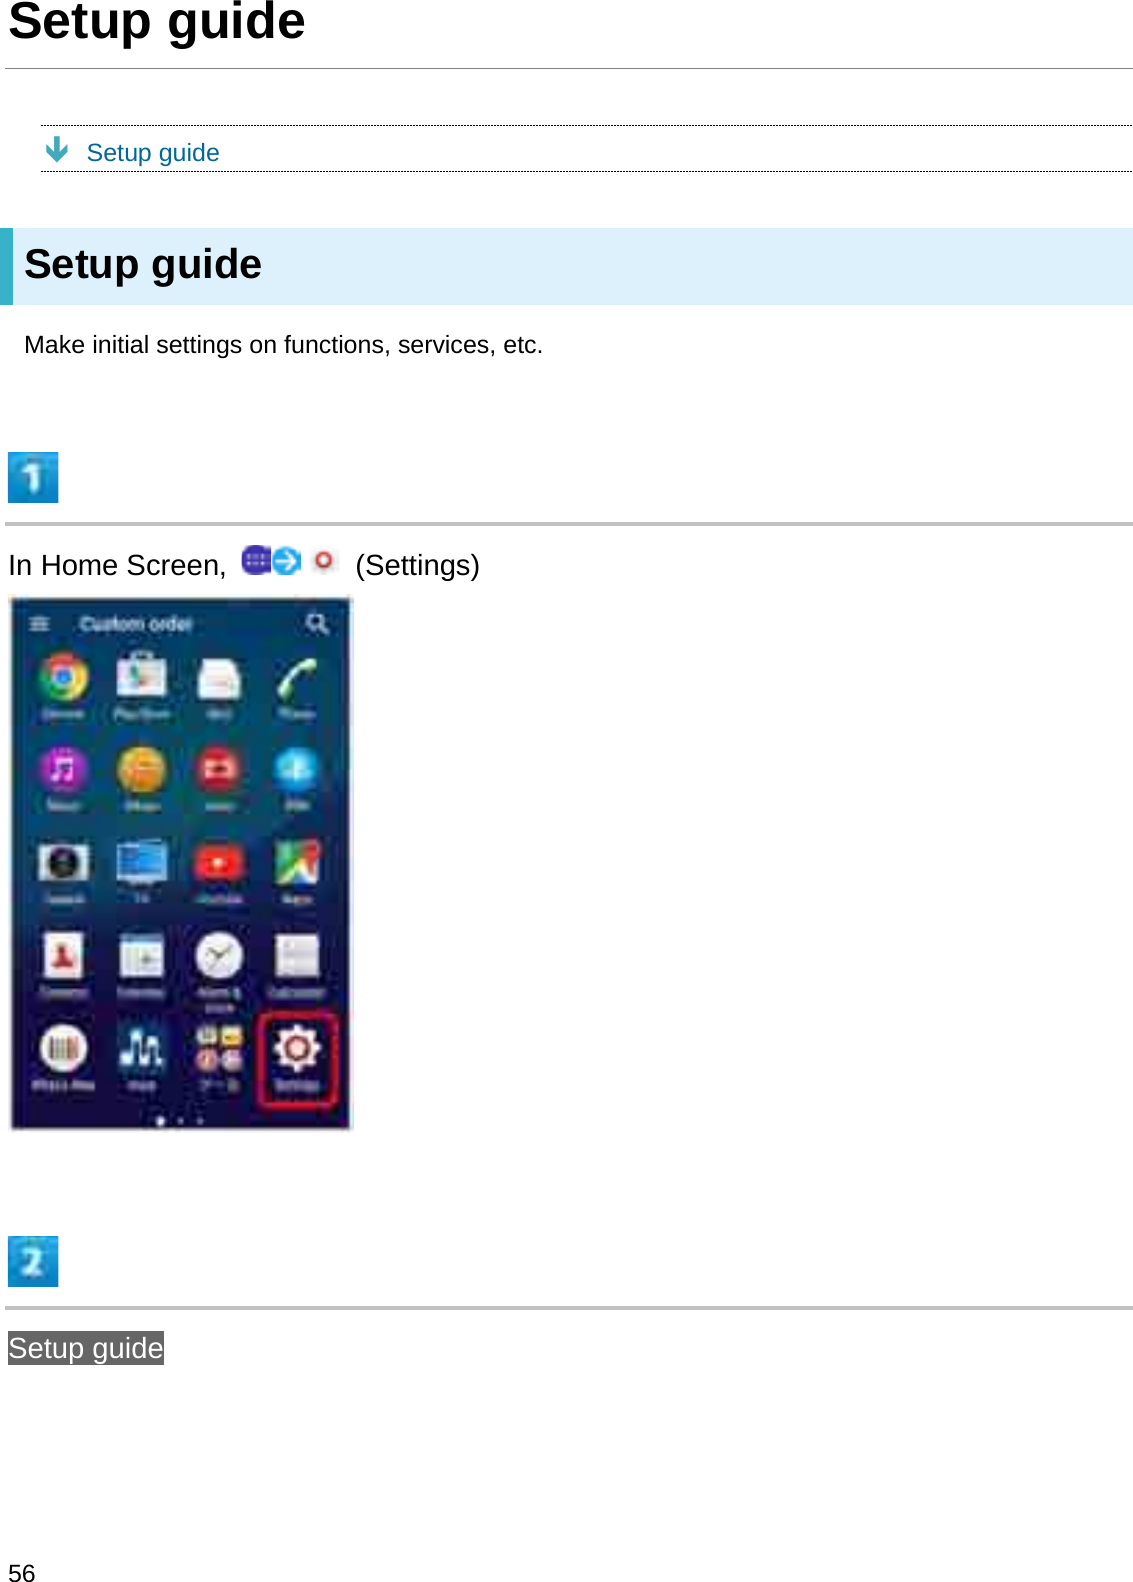 Setup guideÐSetup guideSetup guideMake initial settings on functions, services, etc.In Home Screen,  (Settings)Setup guide56